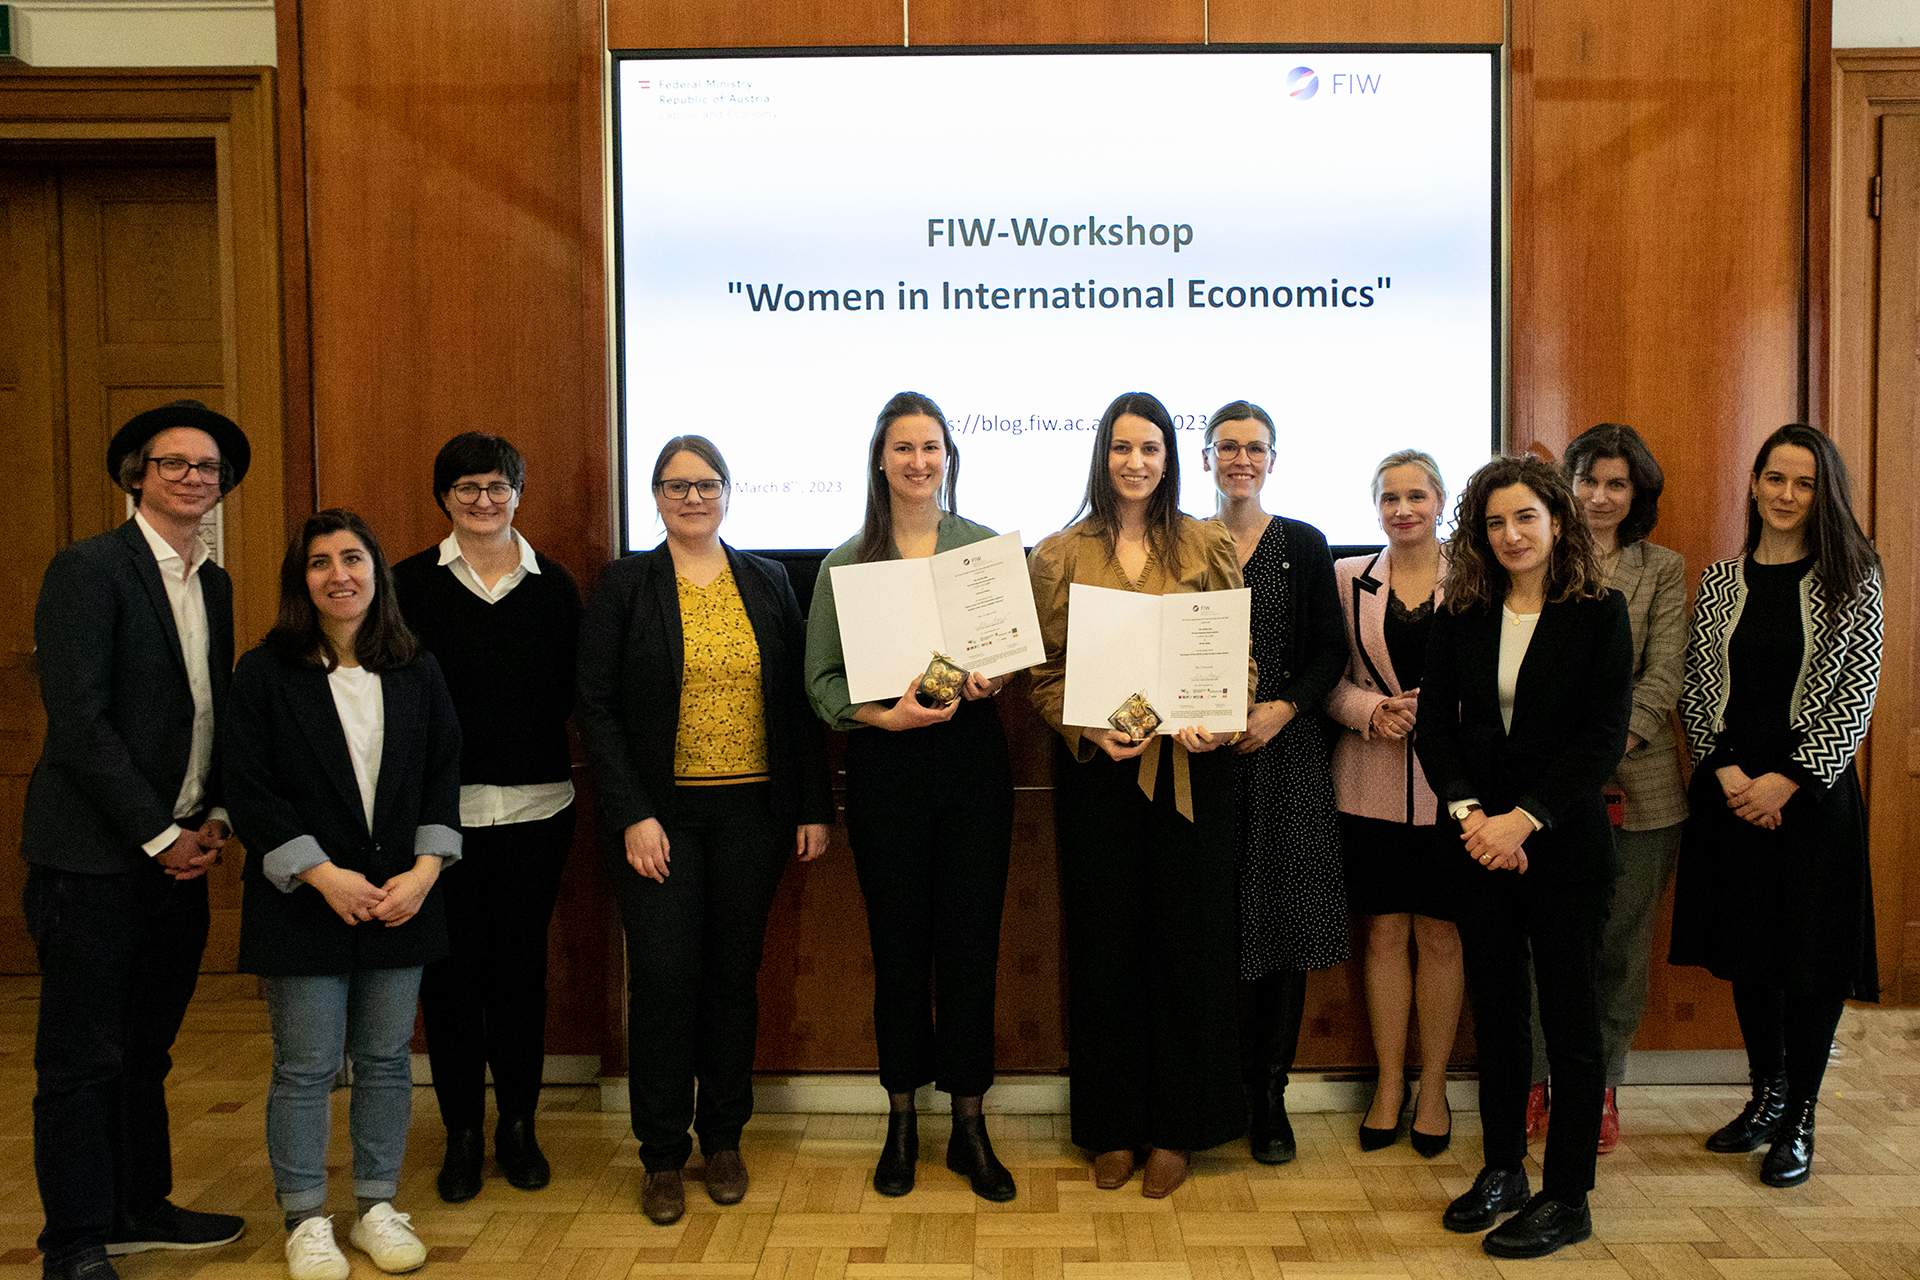 Group photo with the participants of the FIW-Workshop Women in International Economics